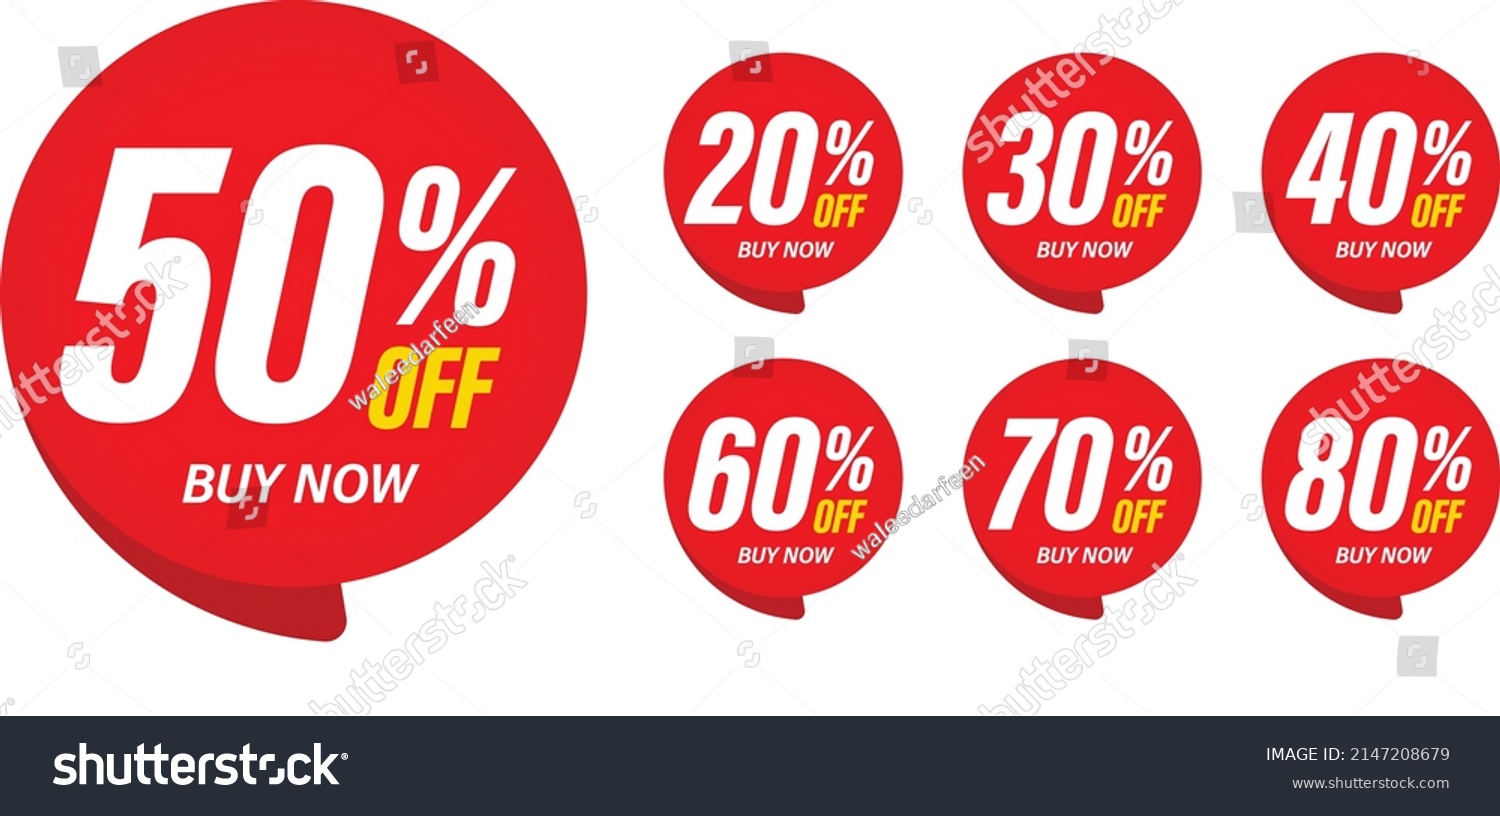 SVG of Different percent discount sticker discount price tag set. Red round speech bubble shape promote buy now with sell off up to 20, 30, 40, 50, 60, 70, 80 percentage vector illustration isolated on white svg